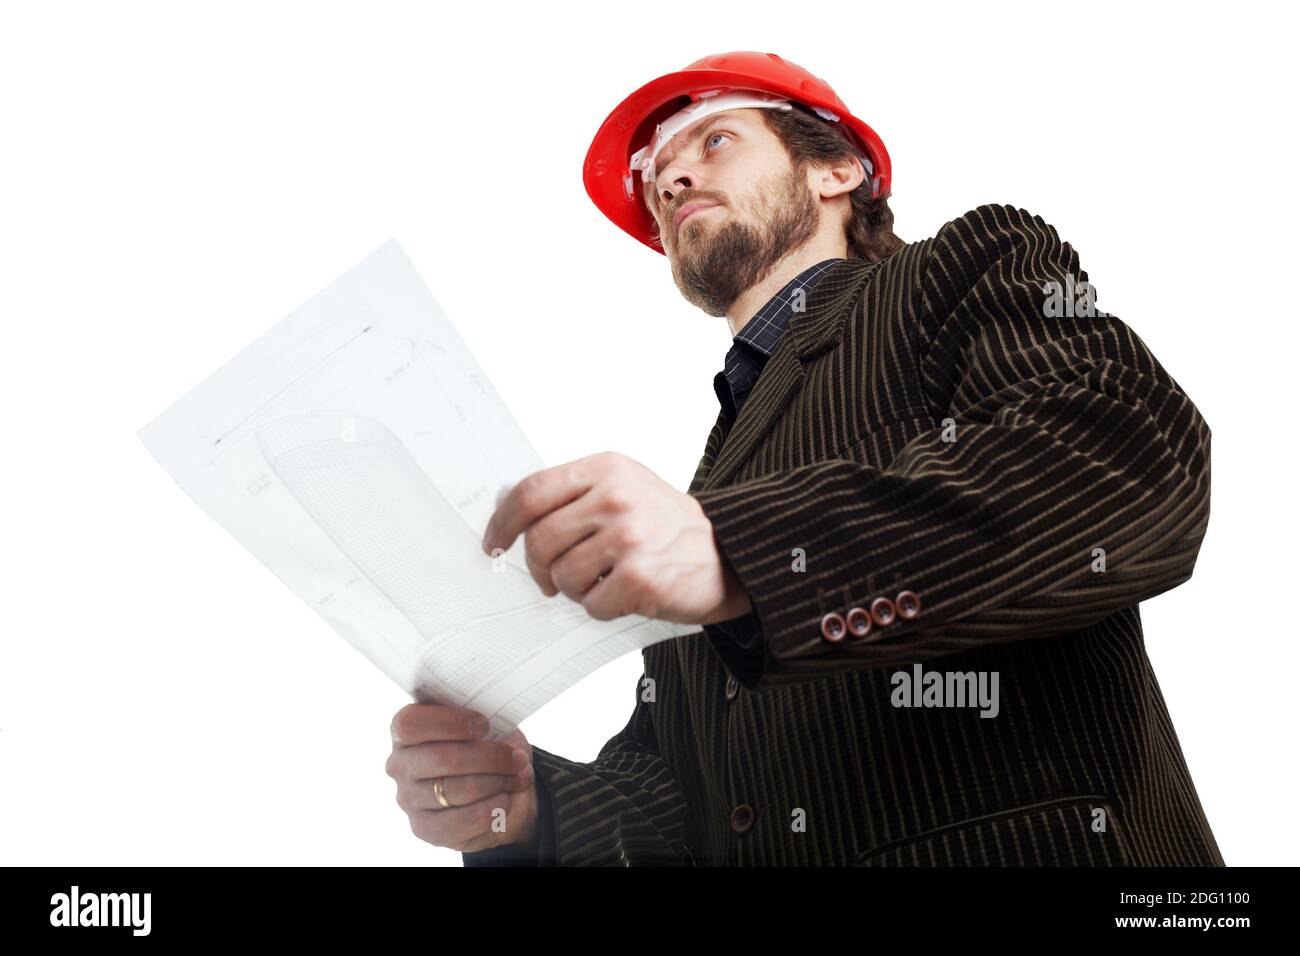 Planner with plan Stock Photo